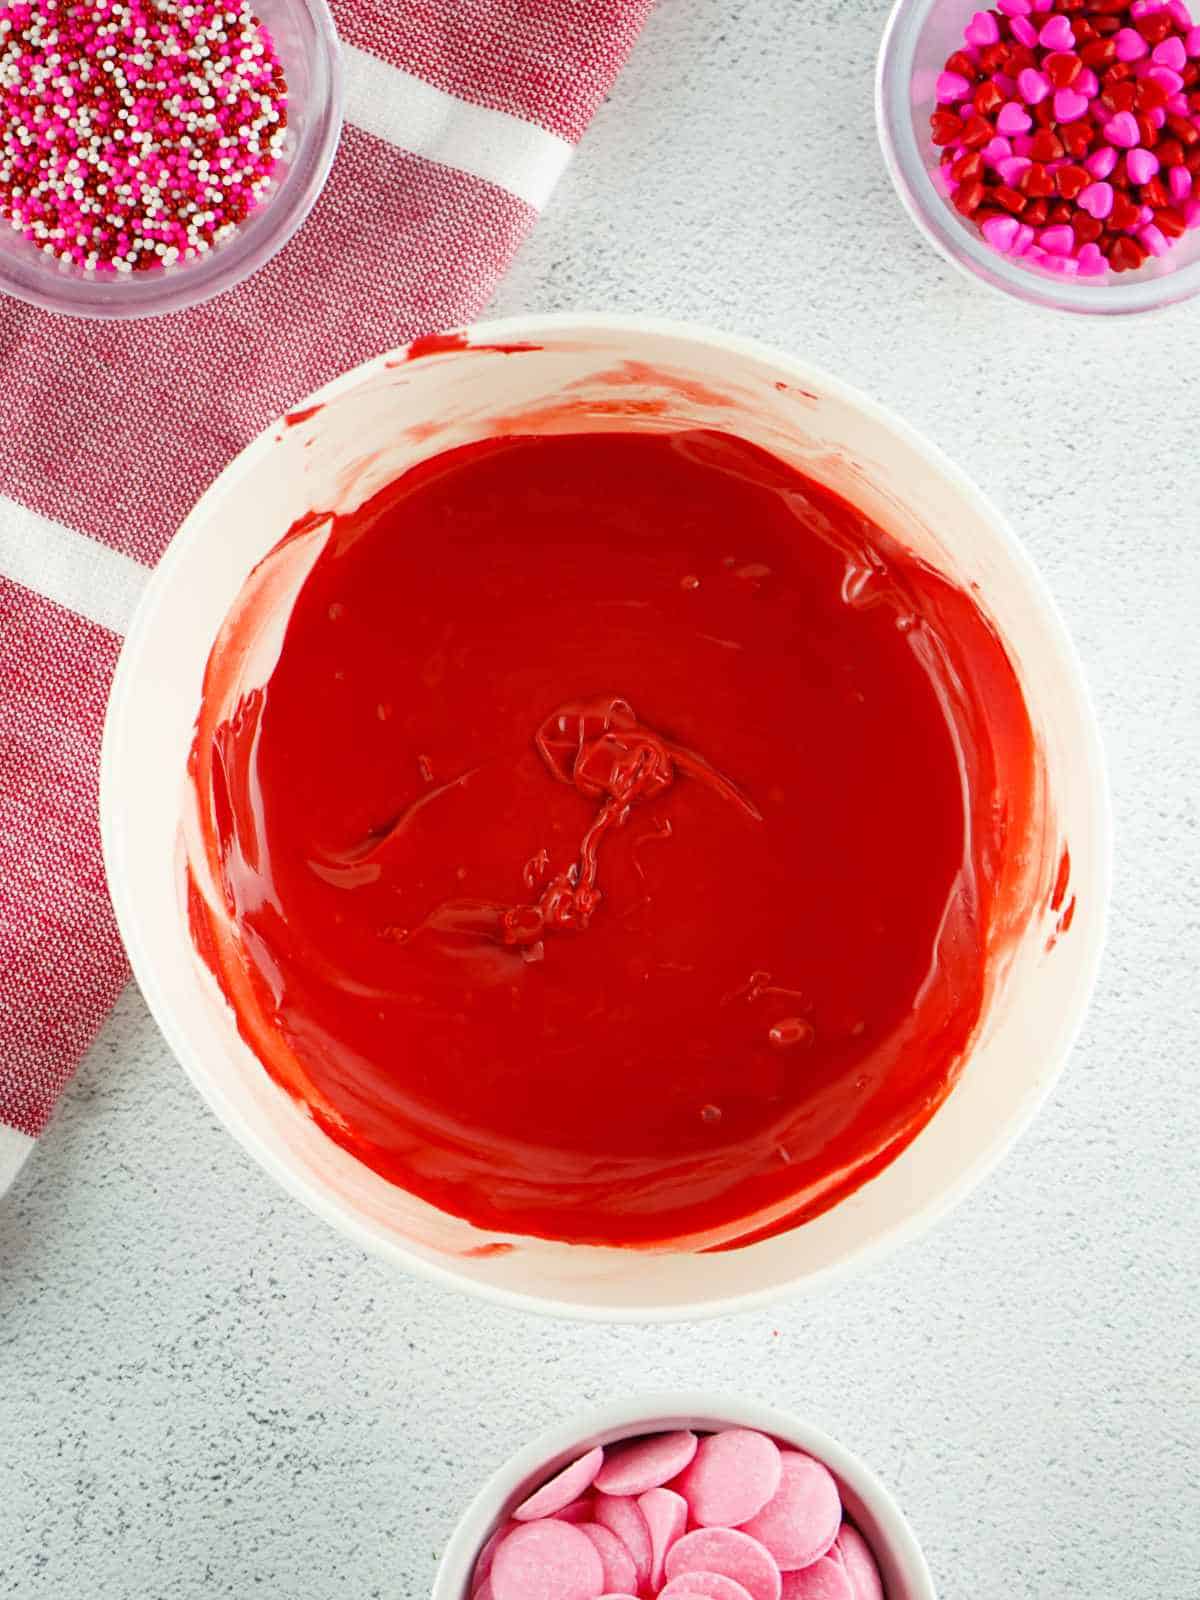 melted red candy melts in a bowl.